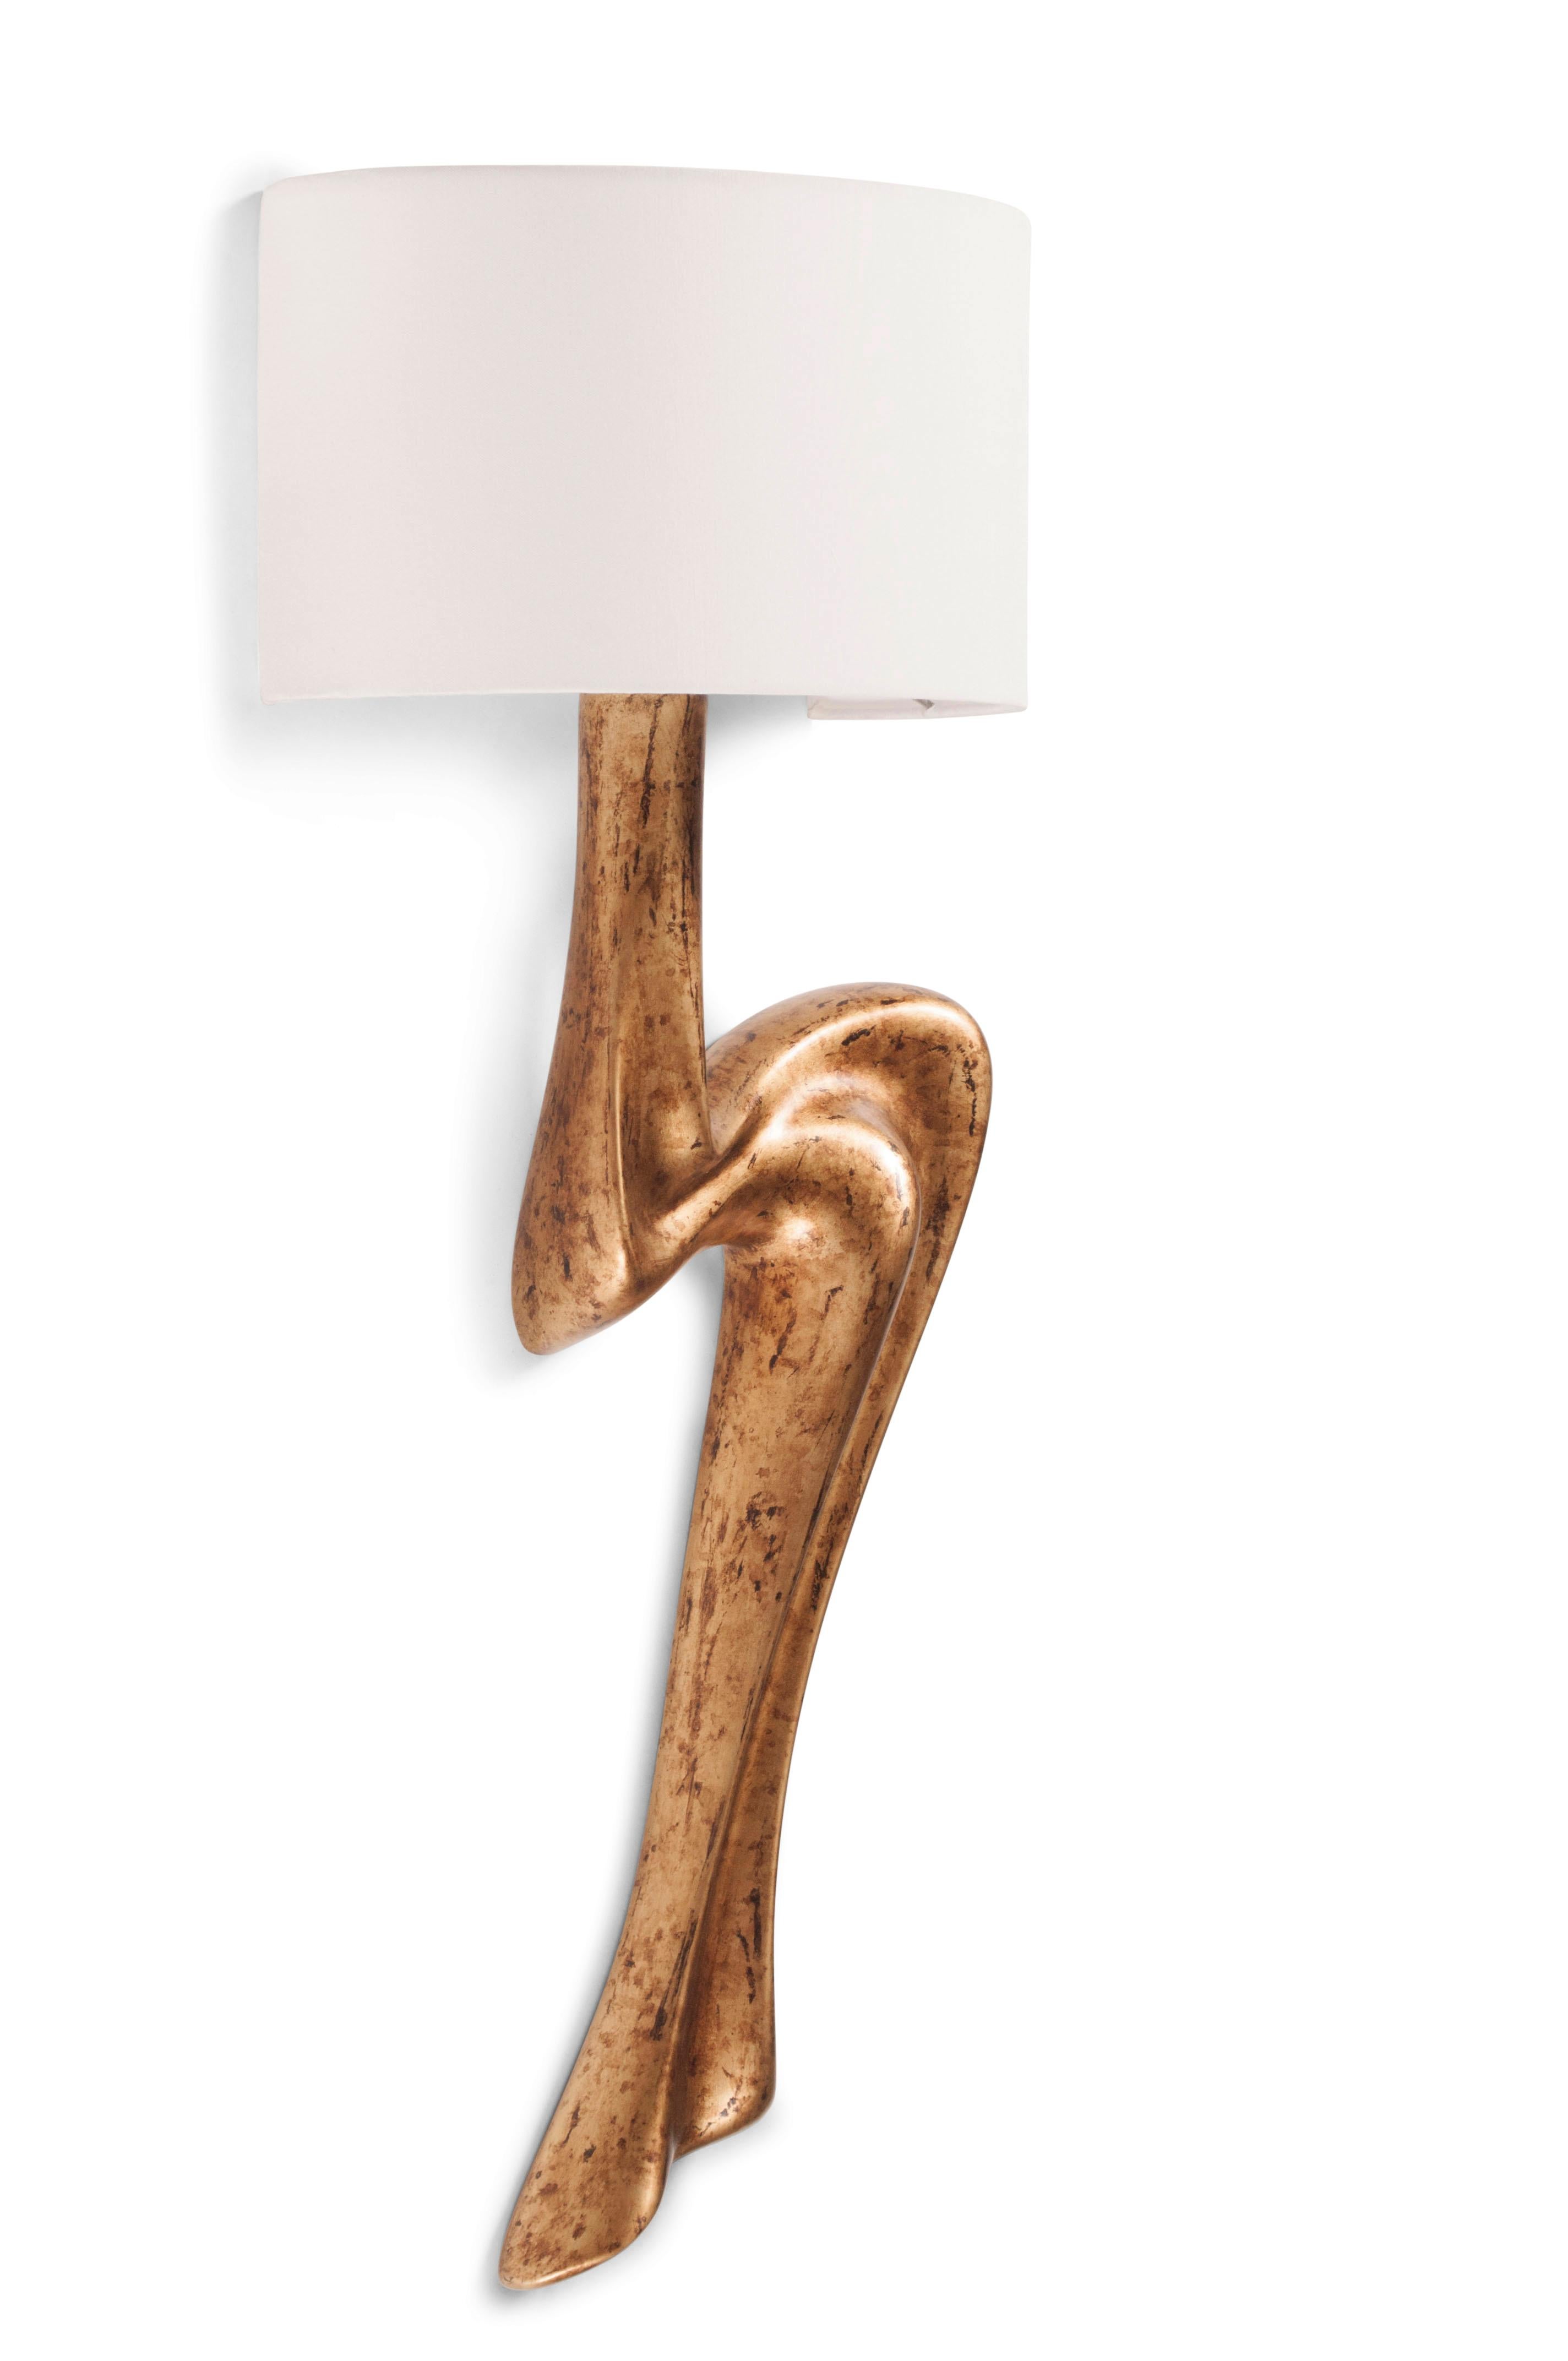 Amorph Emma sconces is made from wood and finished with our primary finishes color, rusted gold finish. Shade dimensions: 12